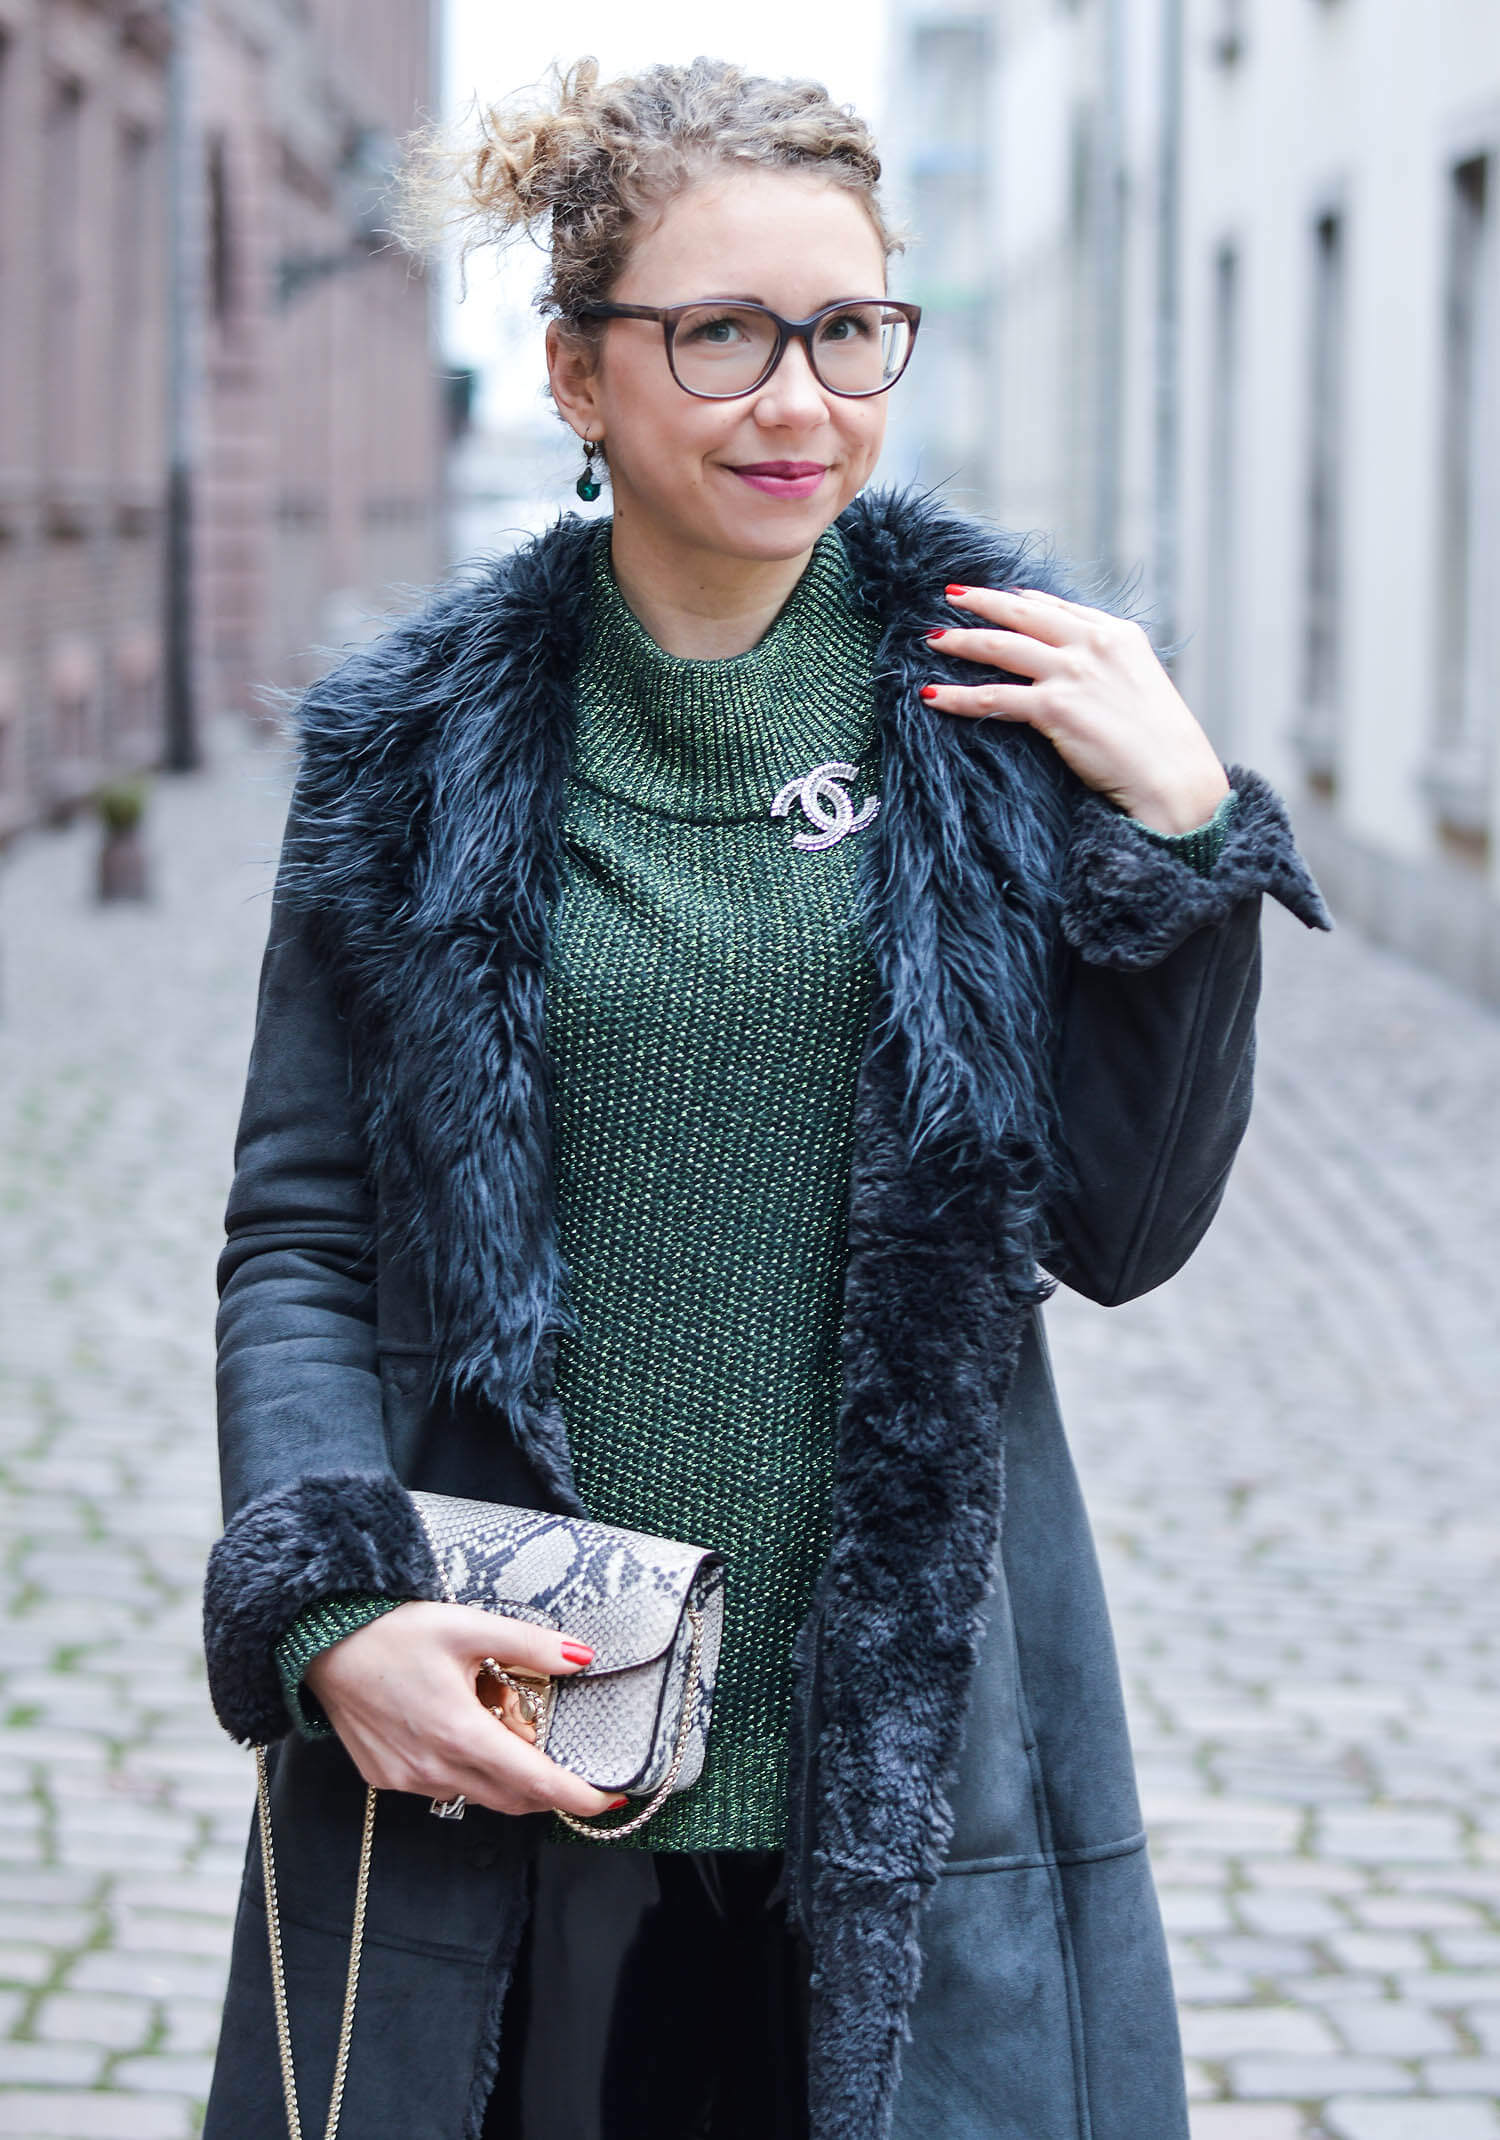 Kationette-fashionblogger-nrw-Outfit-Winter-Fashion-with-Green-Knit-Vinyl-Shearling-Coat-and-Overknees